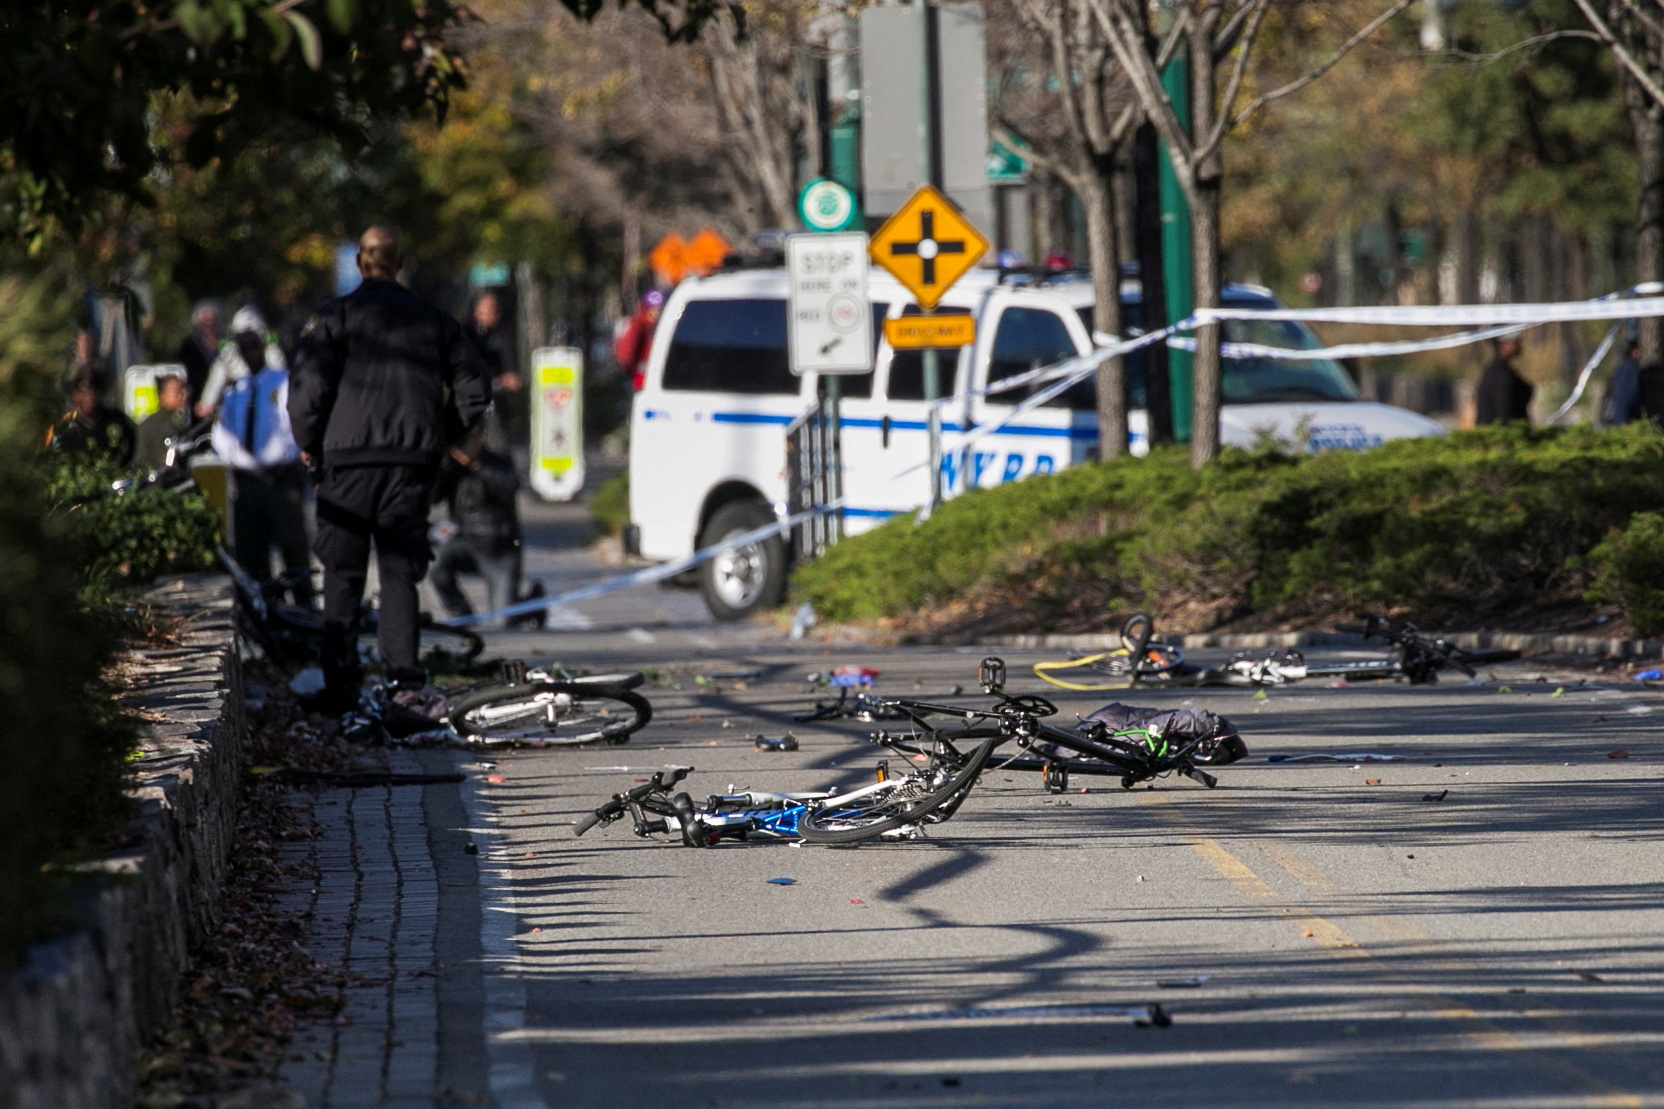 Man behind deadly New York bike path attack sought martyrdom, defense says